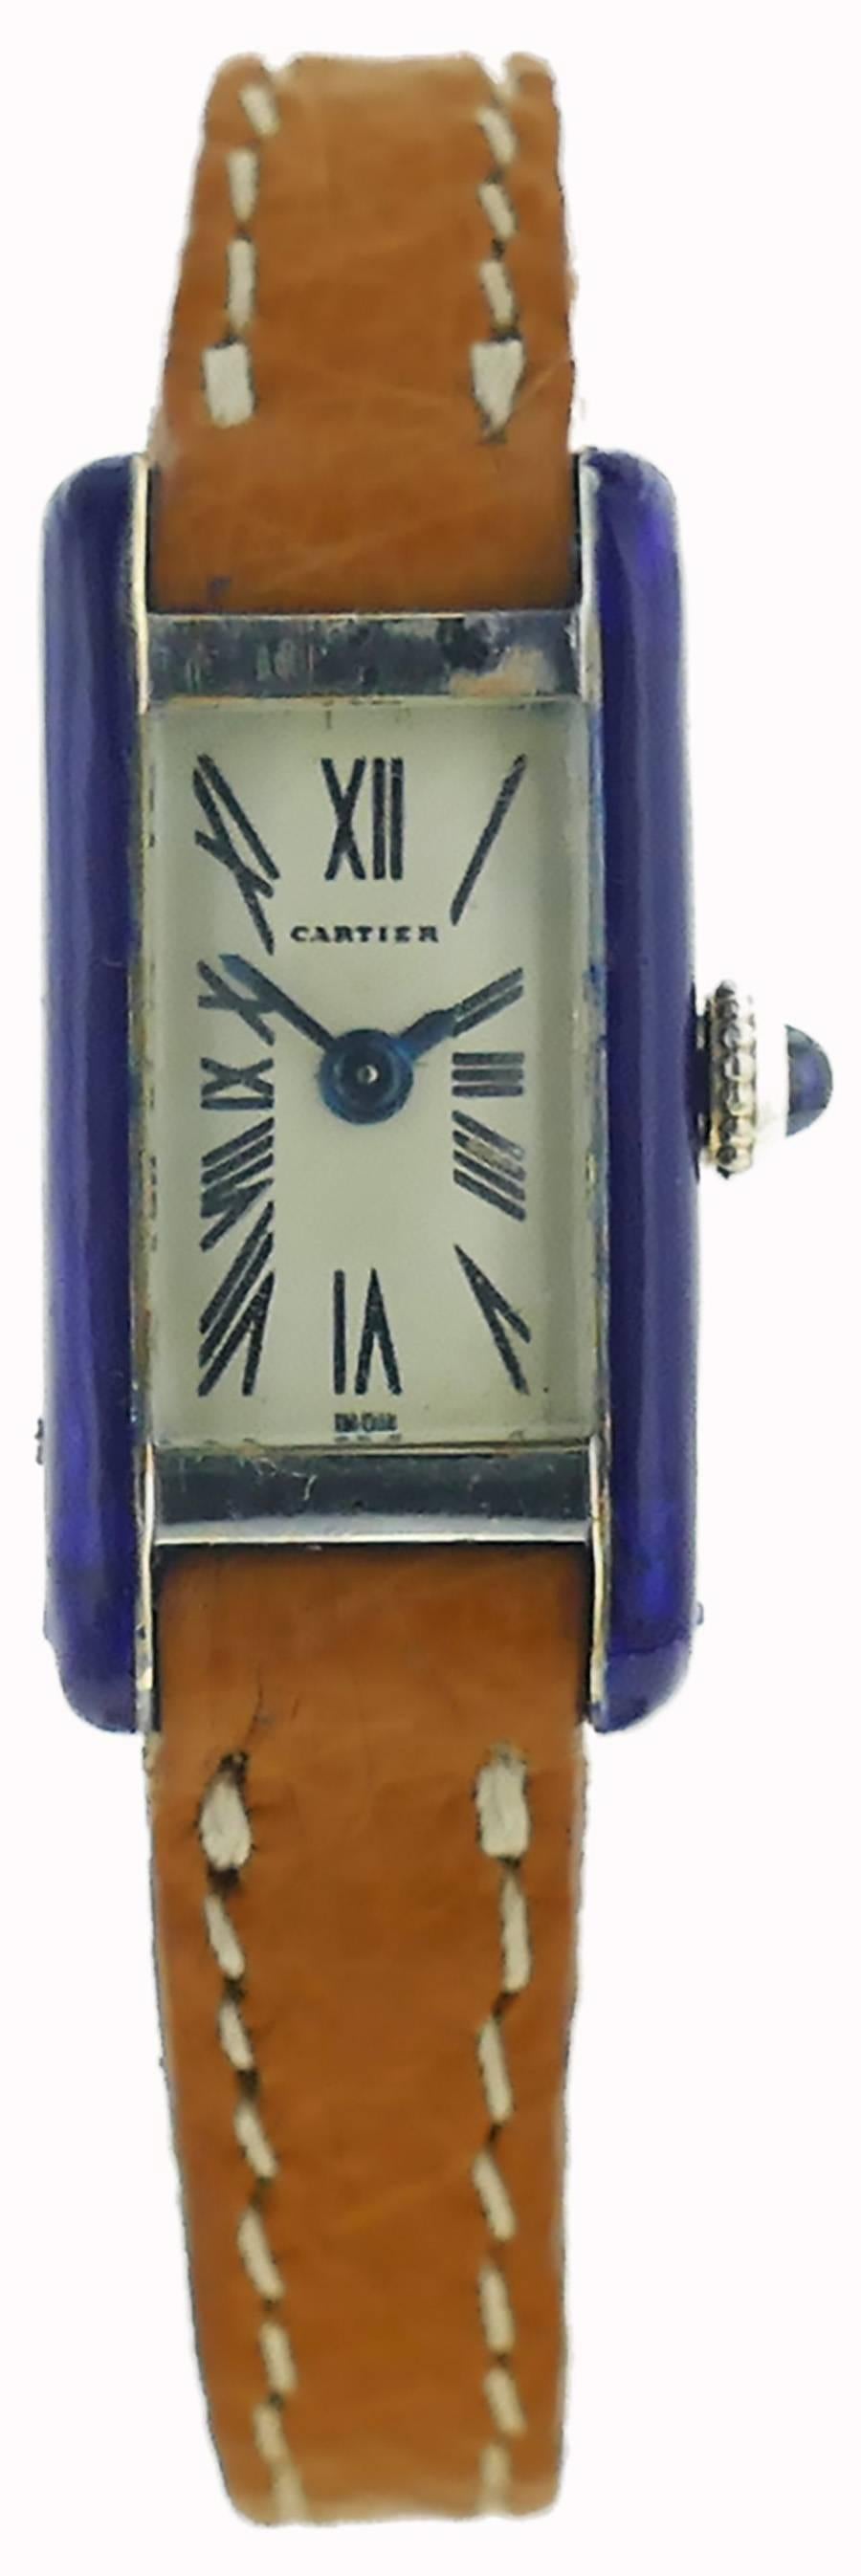 Offered For Sale is a Very Rare & Sought After Vintage 1960s Ladies Cartier Tank Allongee Mini 18k White / Yellow Gold Watch W/ Enamel Bezel. The Watch's Movement is Hallmarked "Cartier". The Watch is on a Handmade Strap & Original